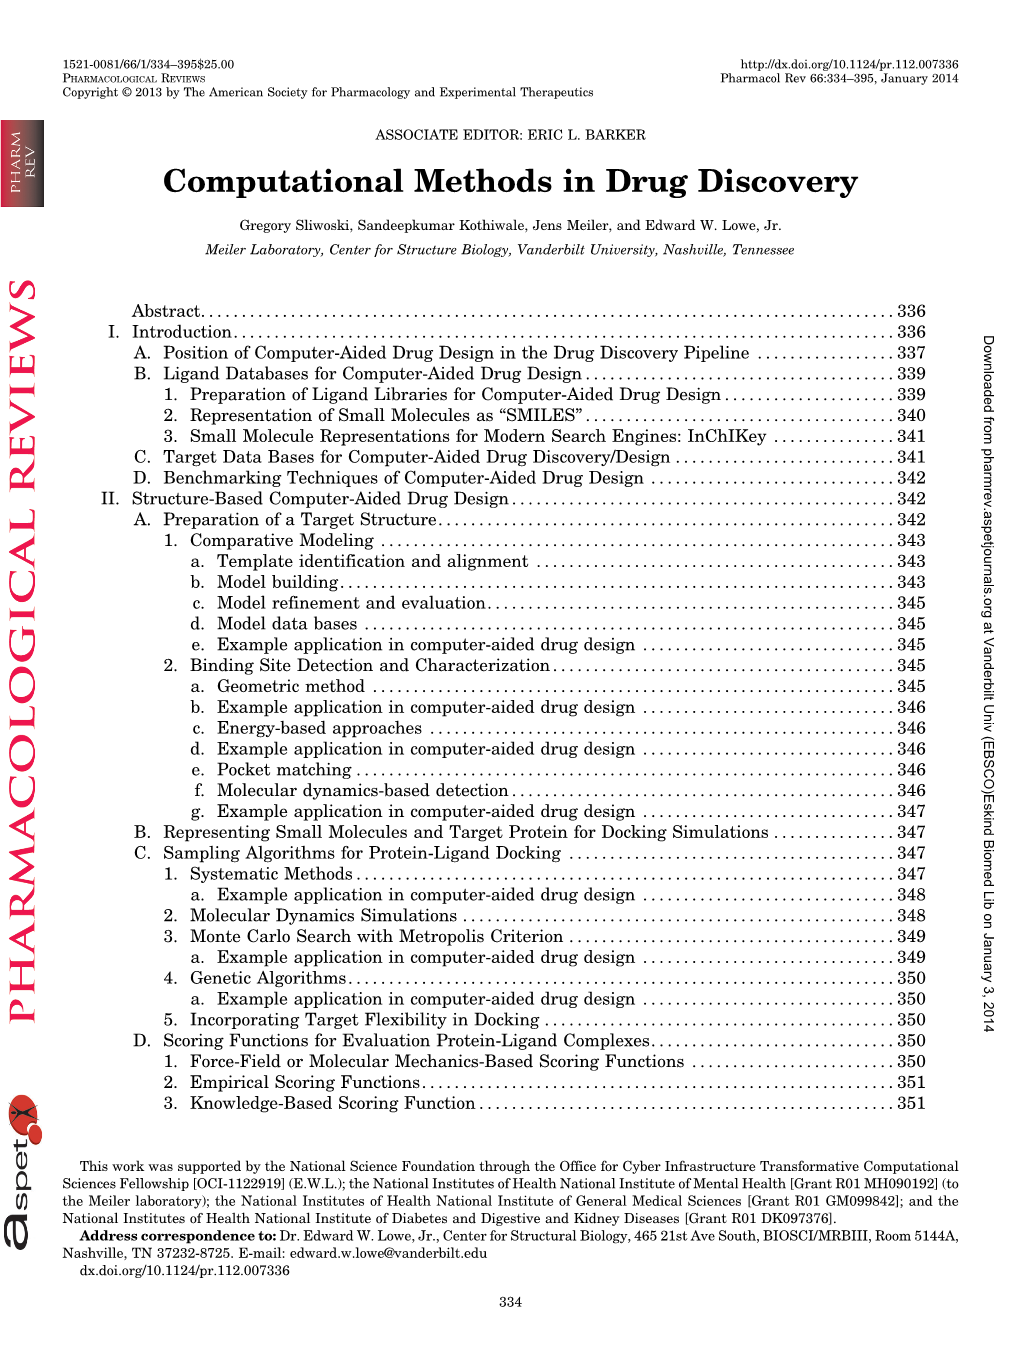 Computational Methods in Drug Discovery